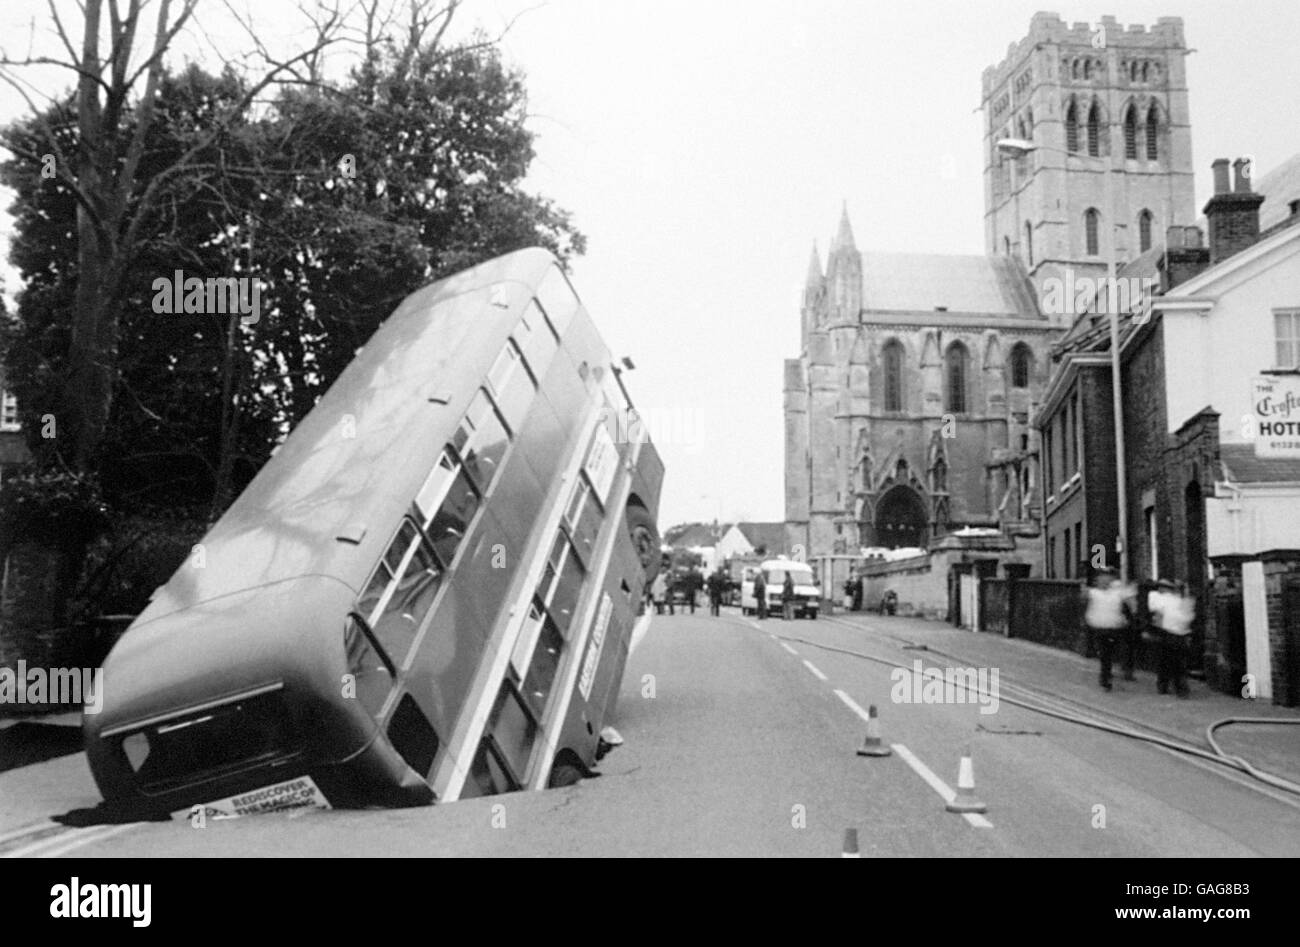 Transport - Holes in the Road - London - 1983. A London bus points to the sky after reversing into a large hole in the road. Stock Photo